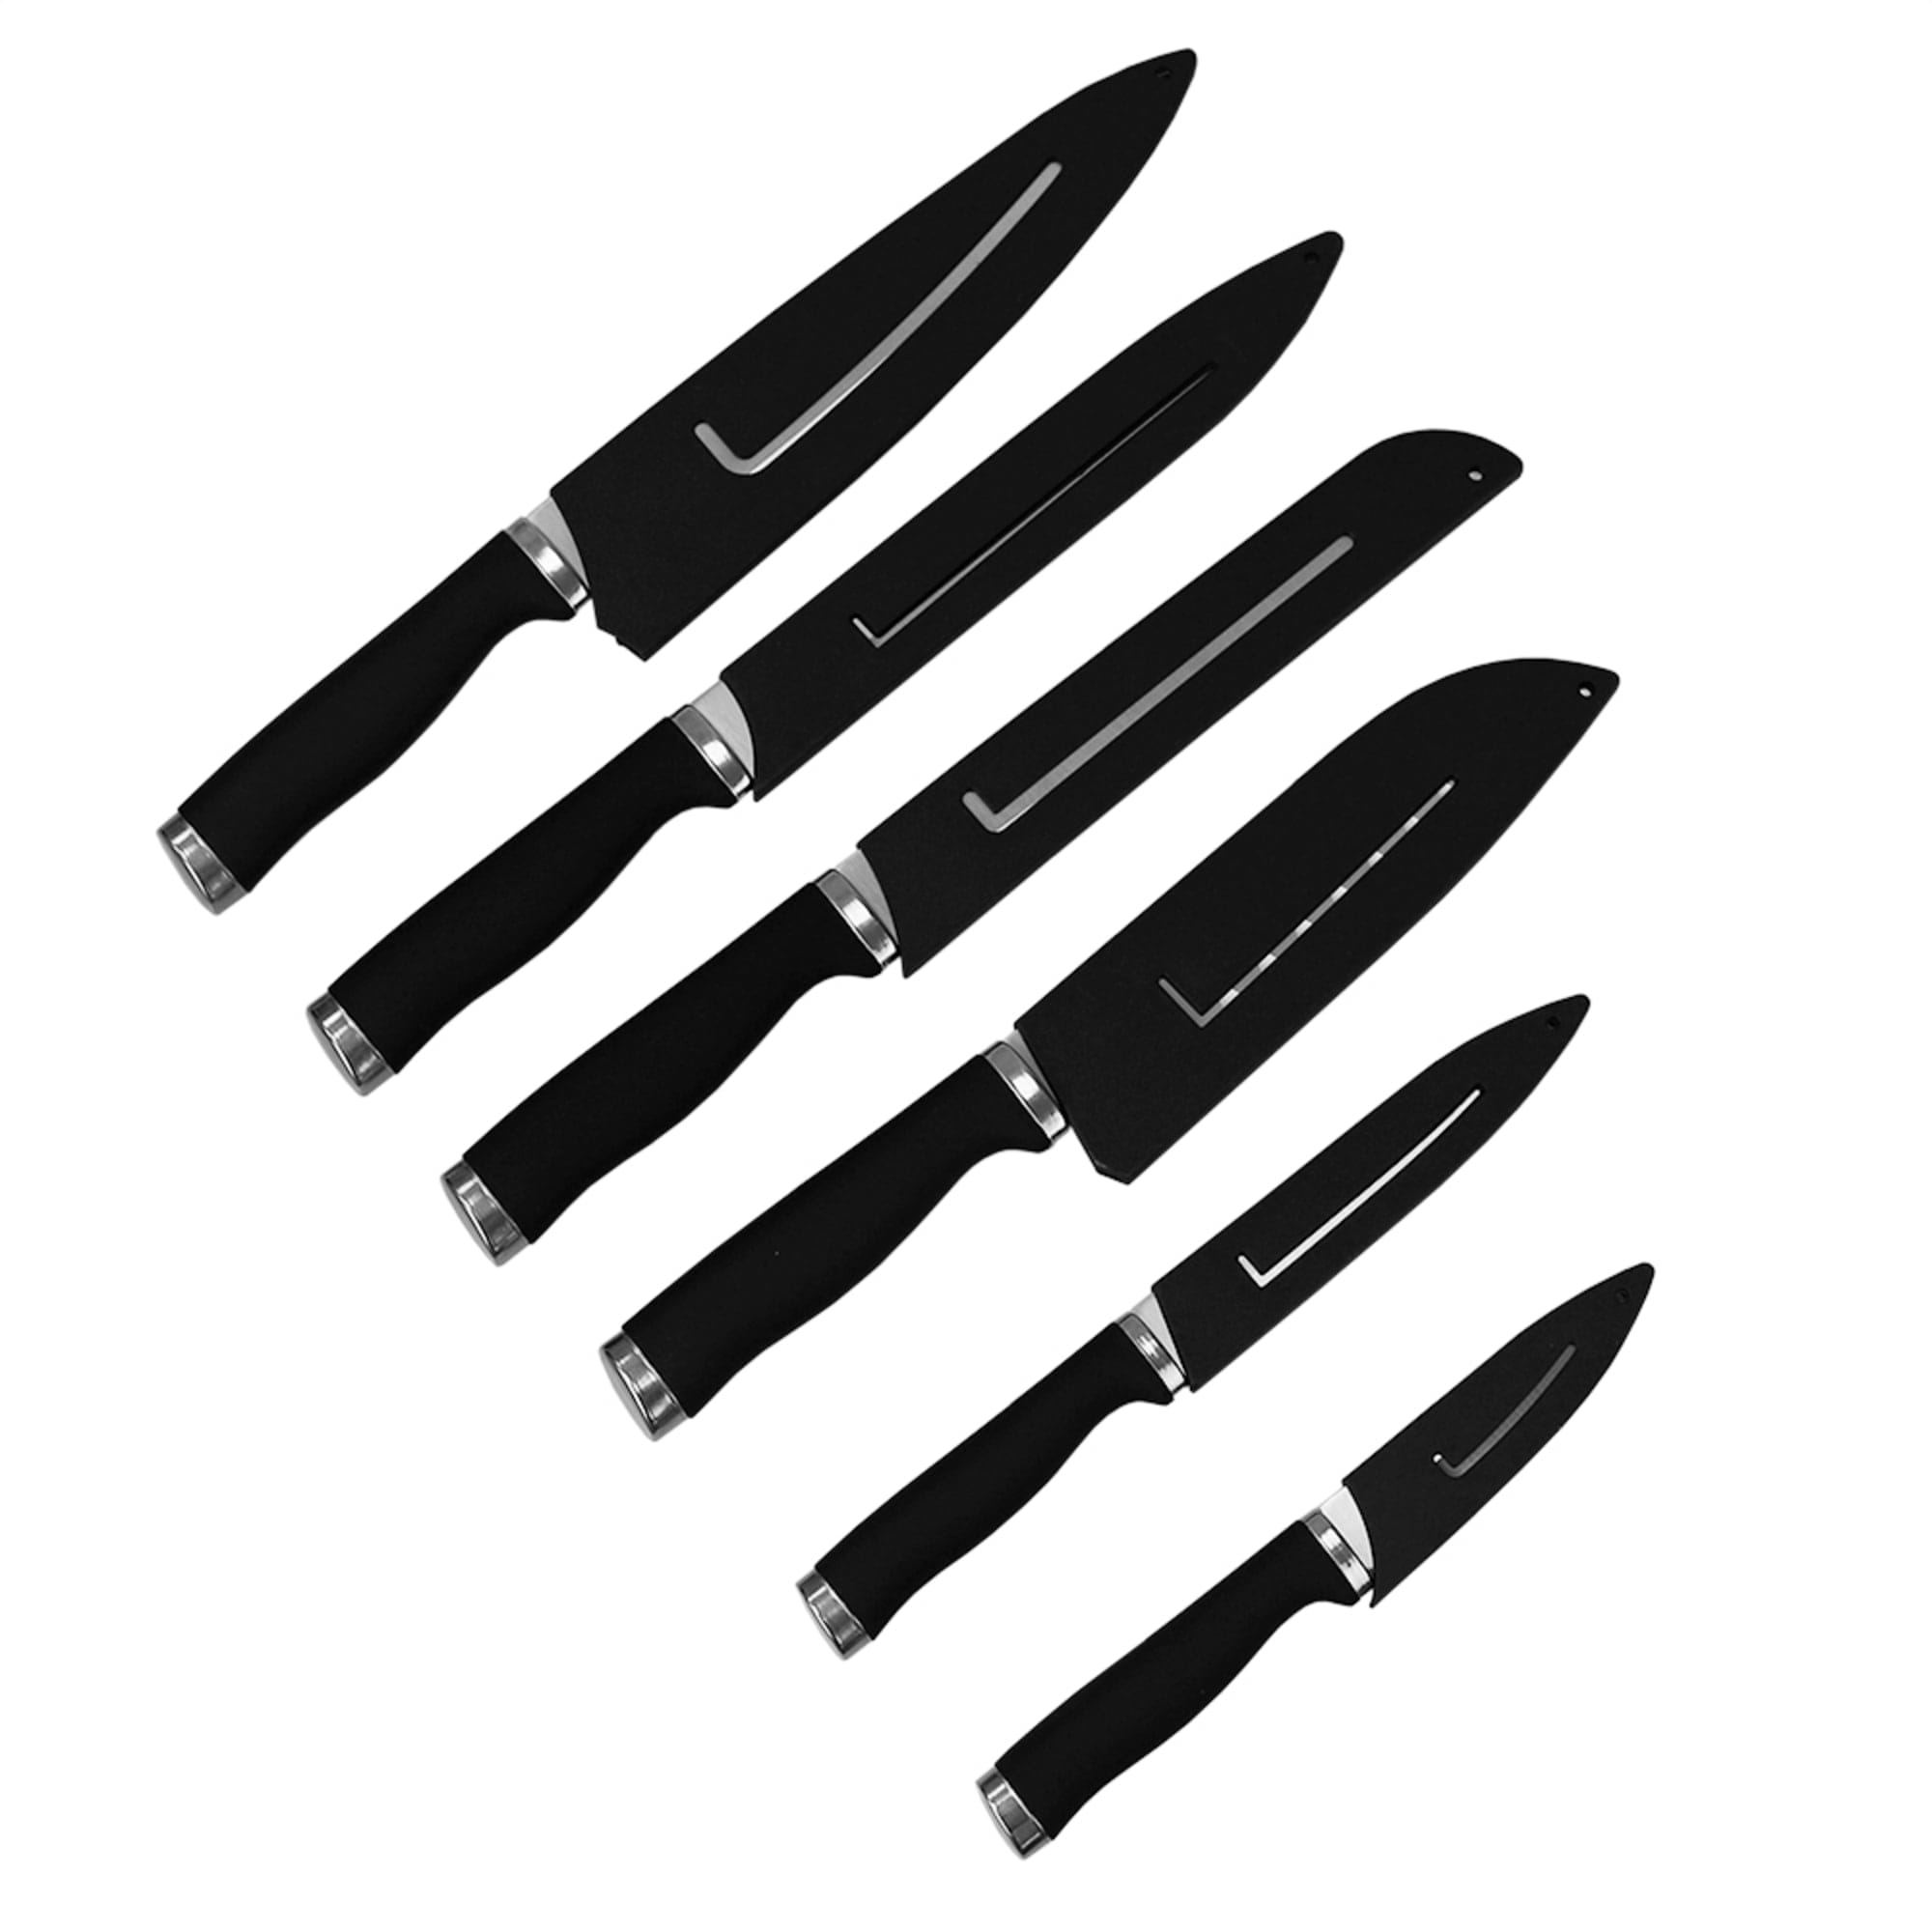 Home Basics Soft Grip  12 Piece Knife Set with Sheaths, Black $10.00 EACH, CASE PACK OF 12